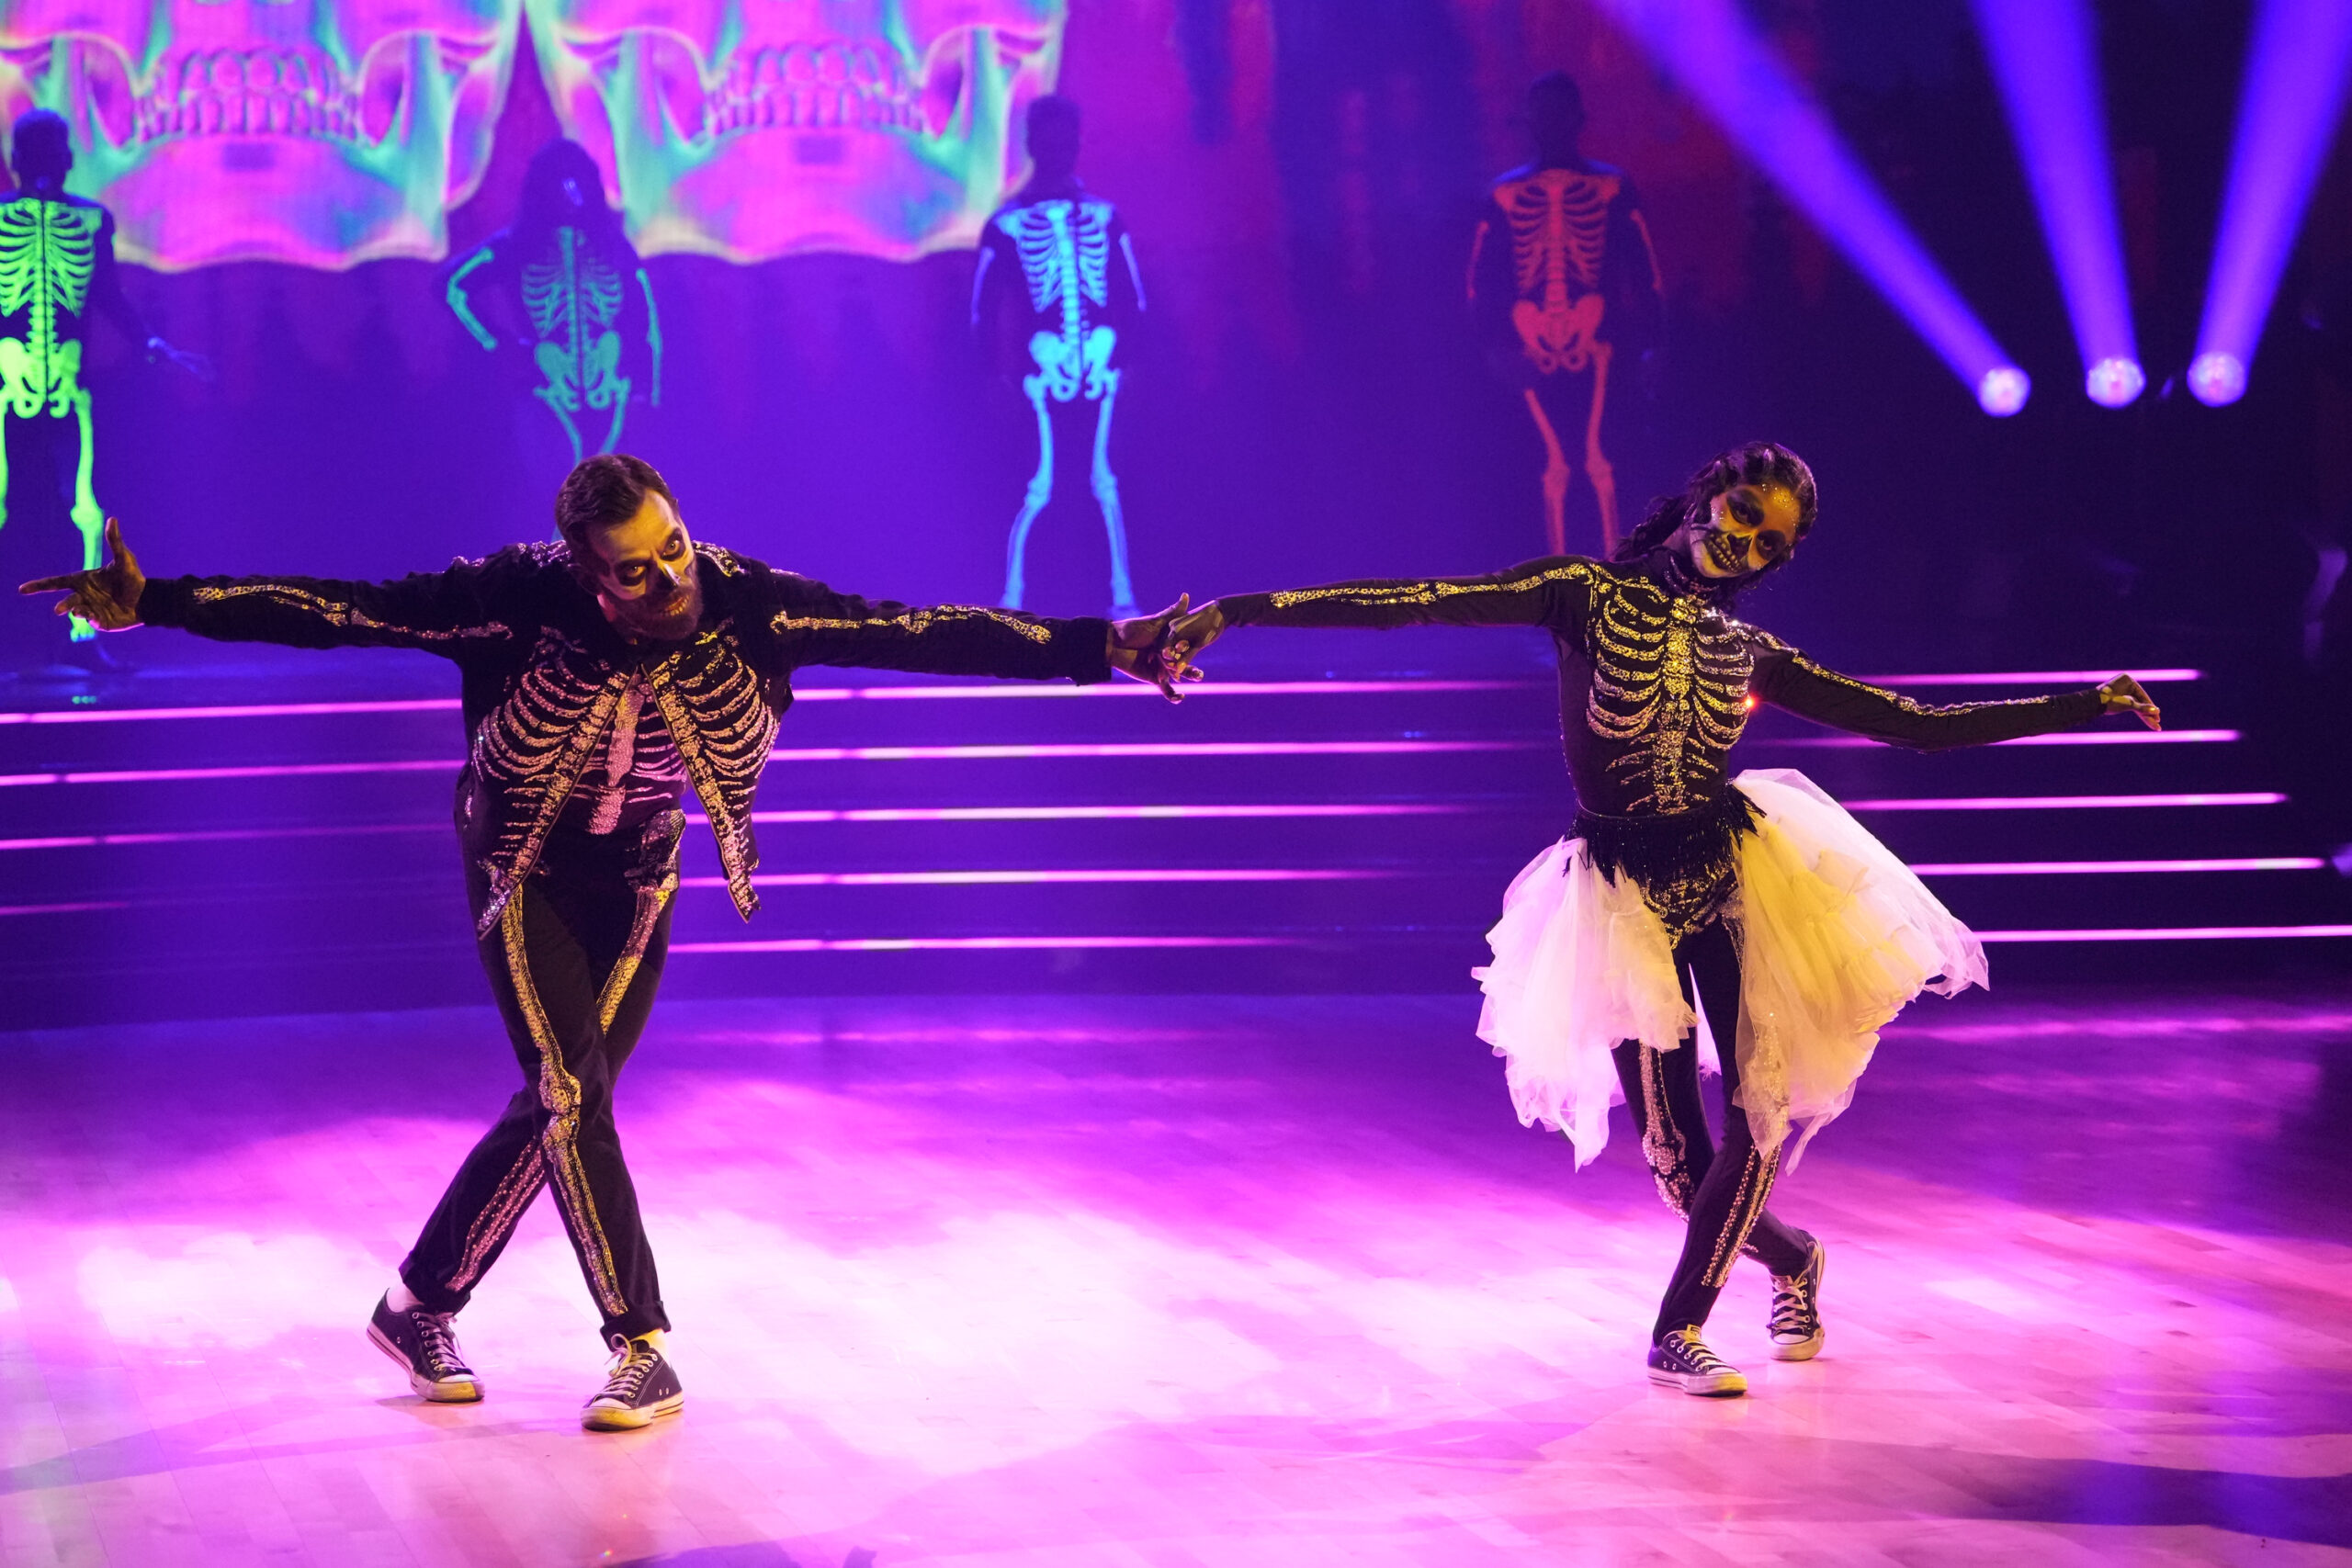 Charity Lawson and partner Artem Chigvintsev perform a Halloween-inspired jive. Photo by Disney/Erin McCandless.